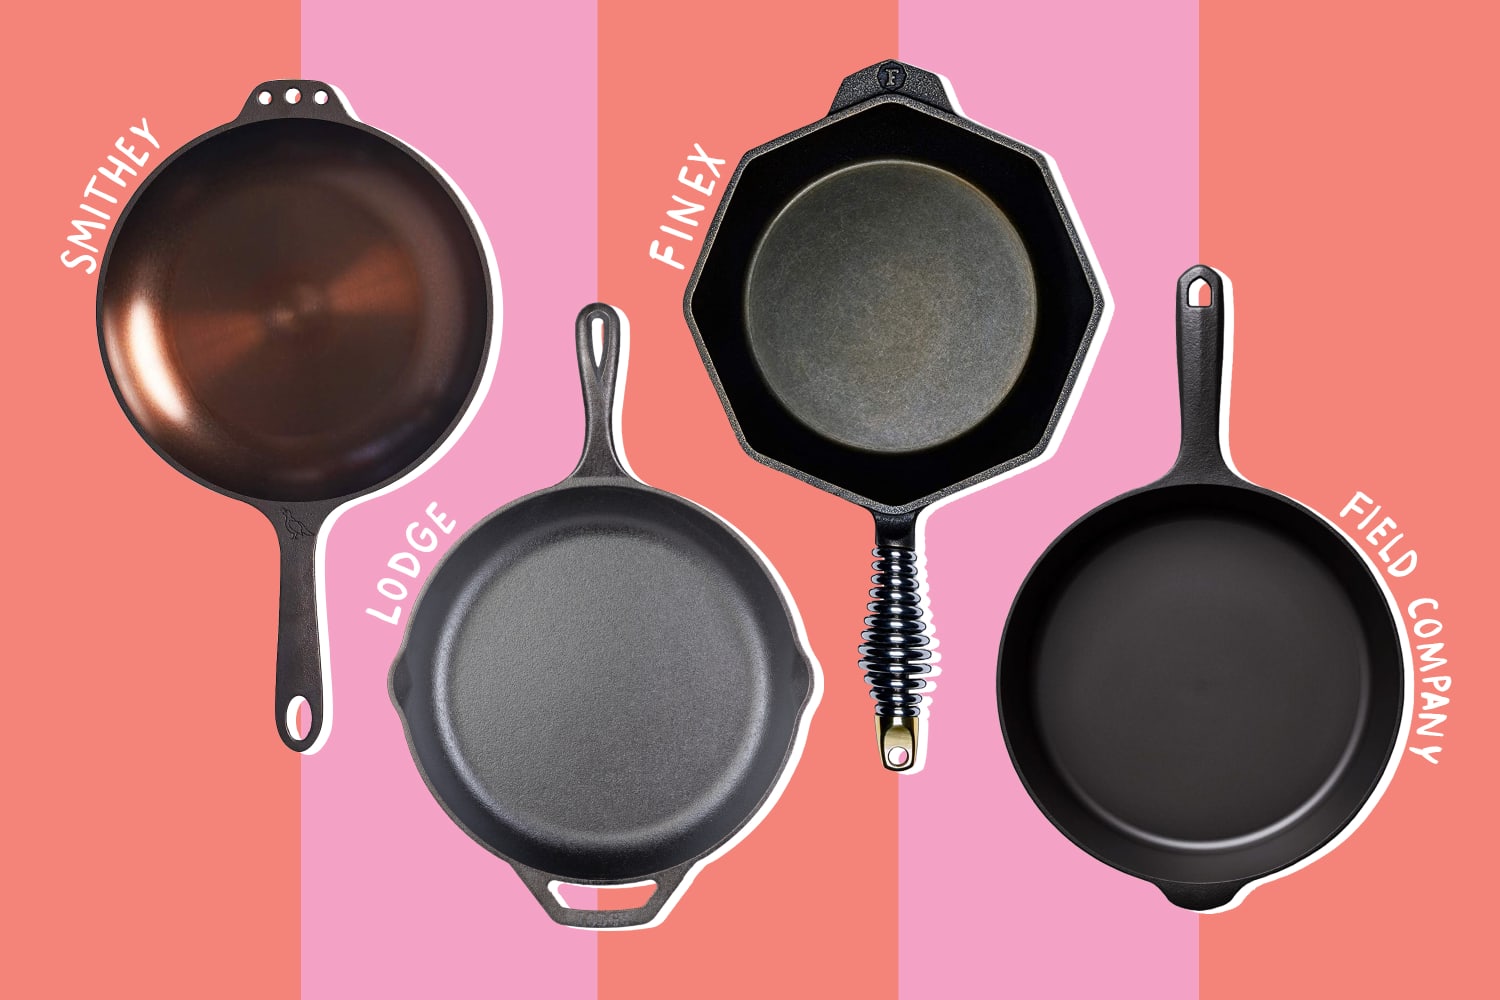 USA Made Cookware and Bakeware - Lodge Cast Iron - Pots and Pans